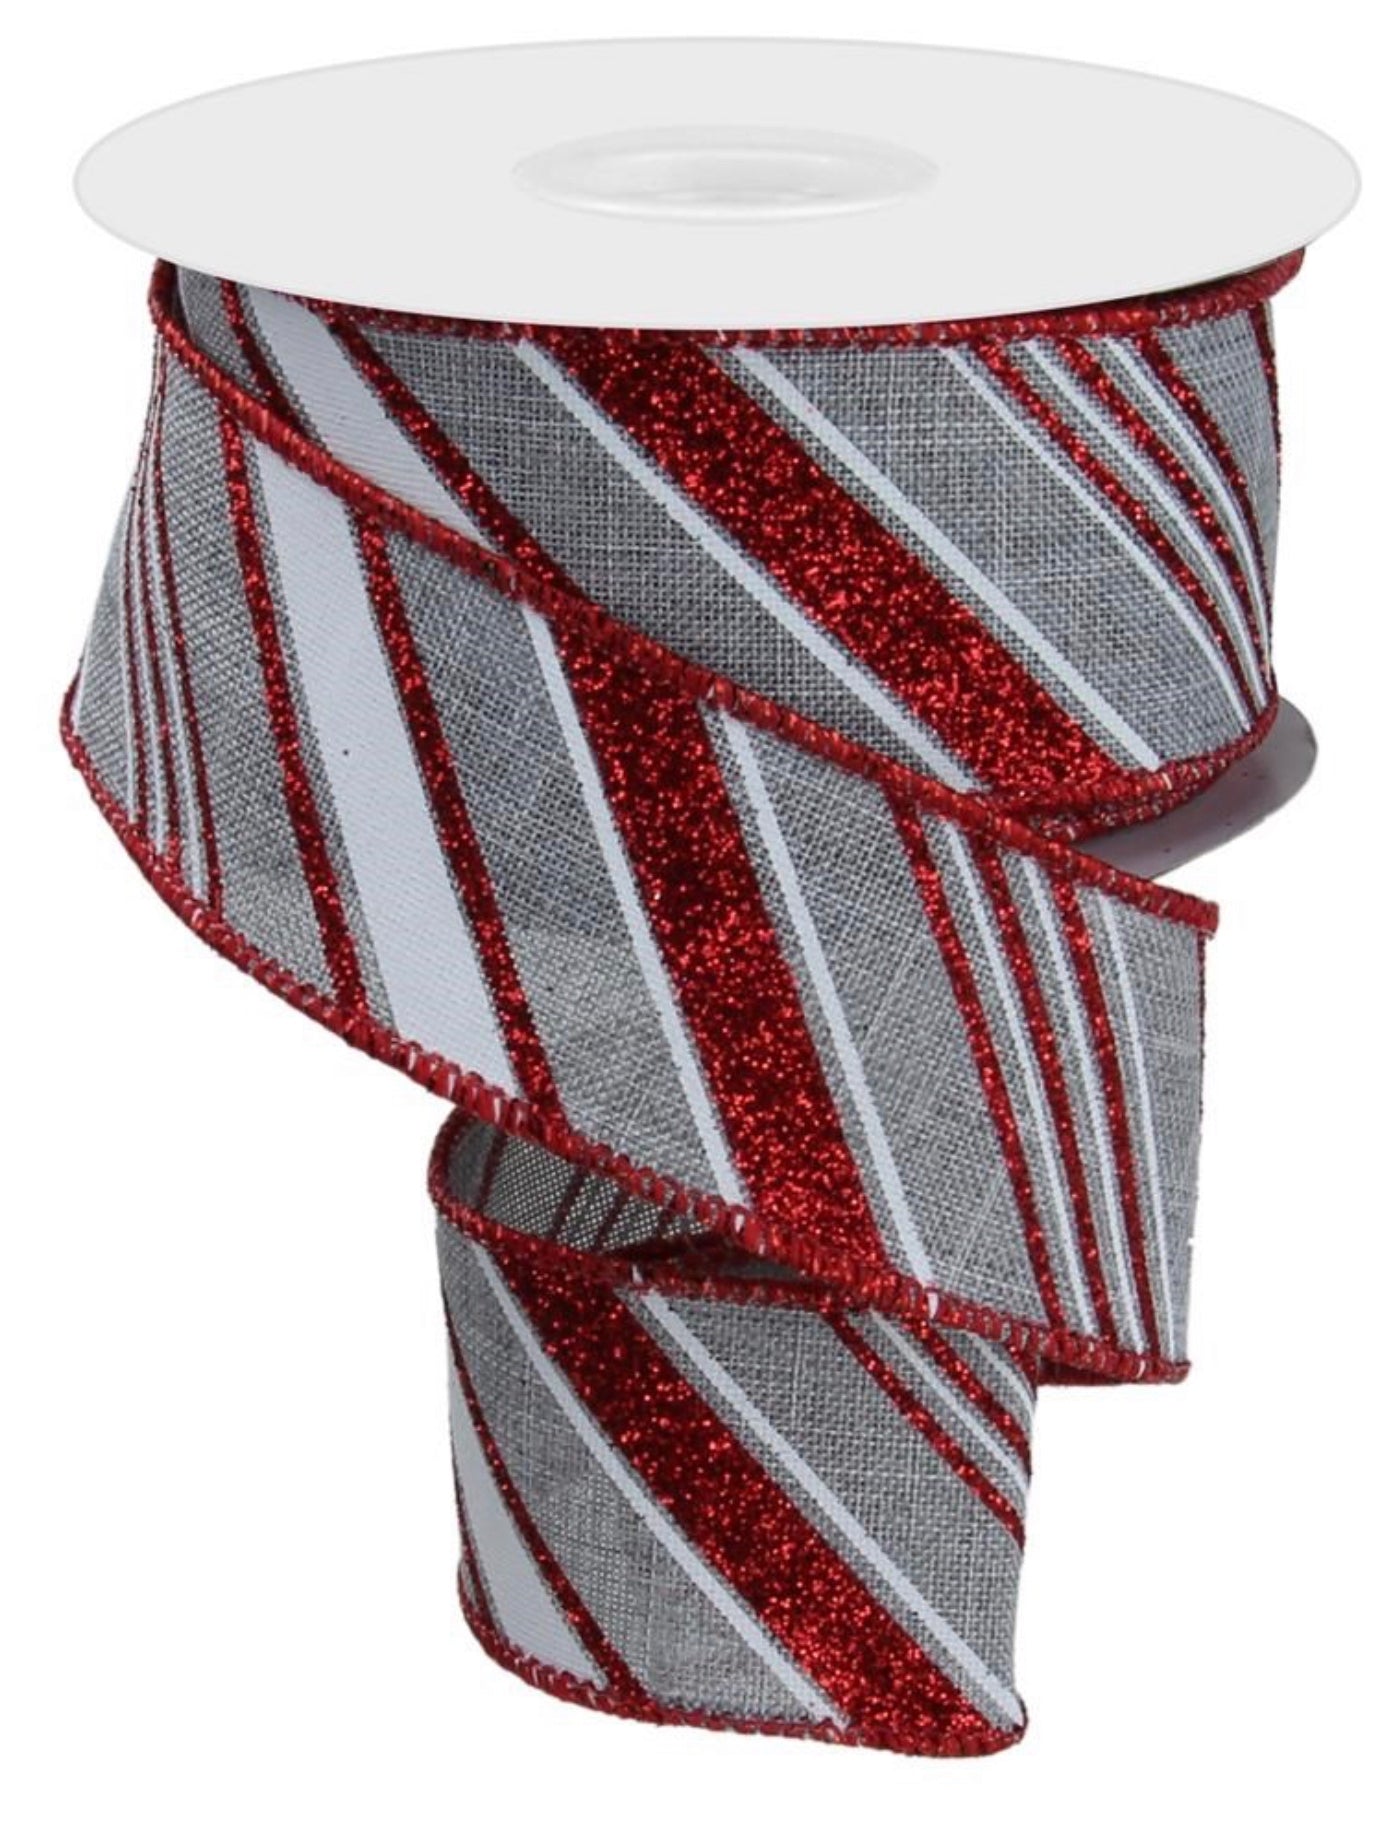 10 Yards - 1.5” Wired Red, Gray, and White Swirl Stripe Ribbon